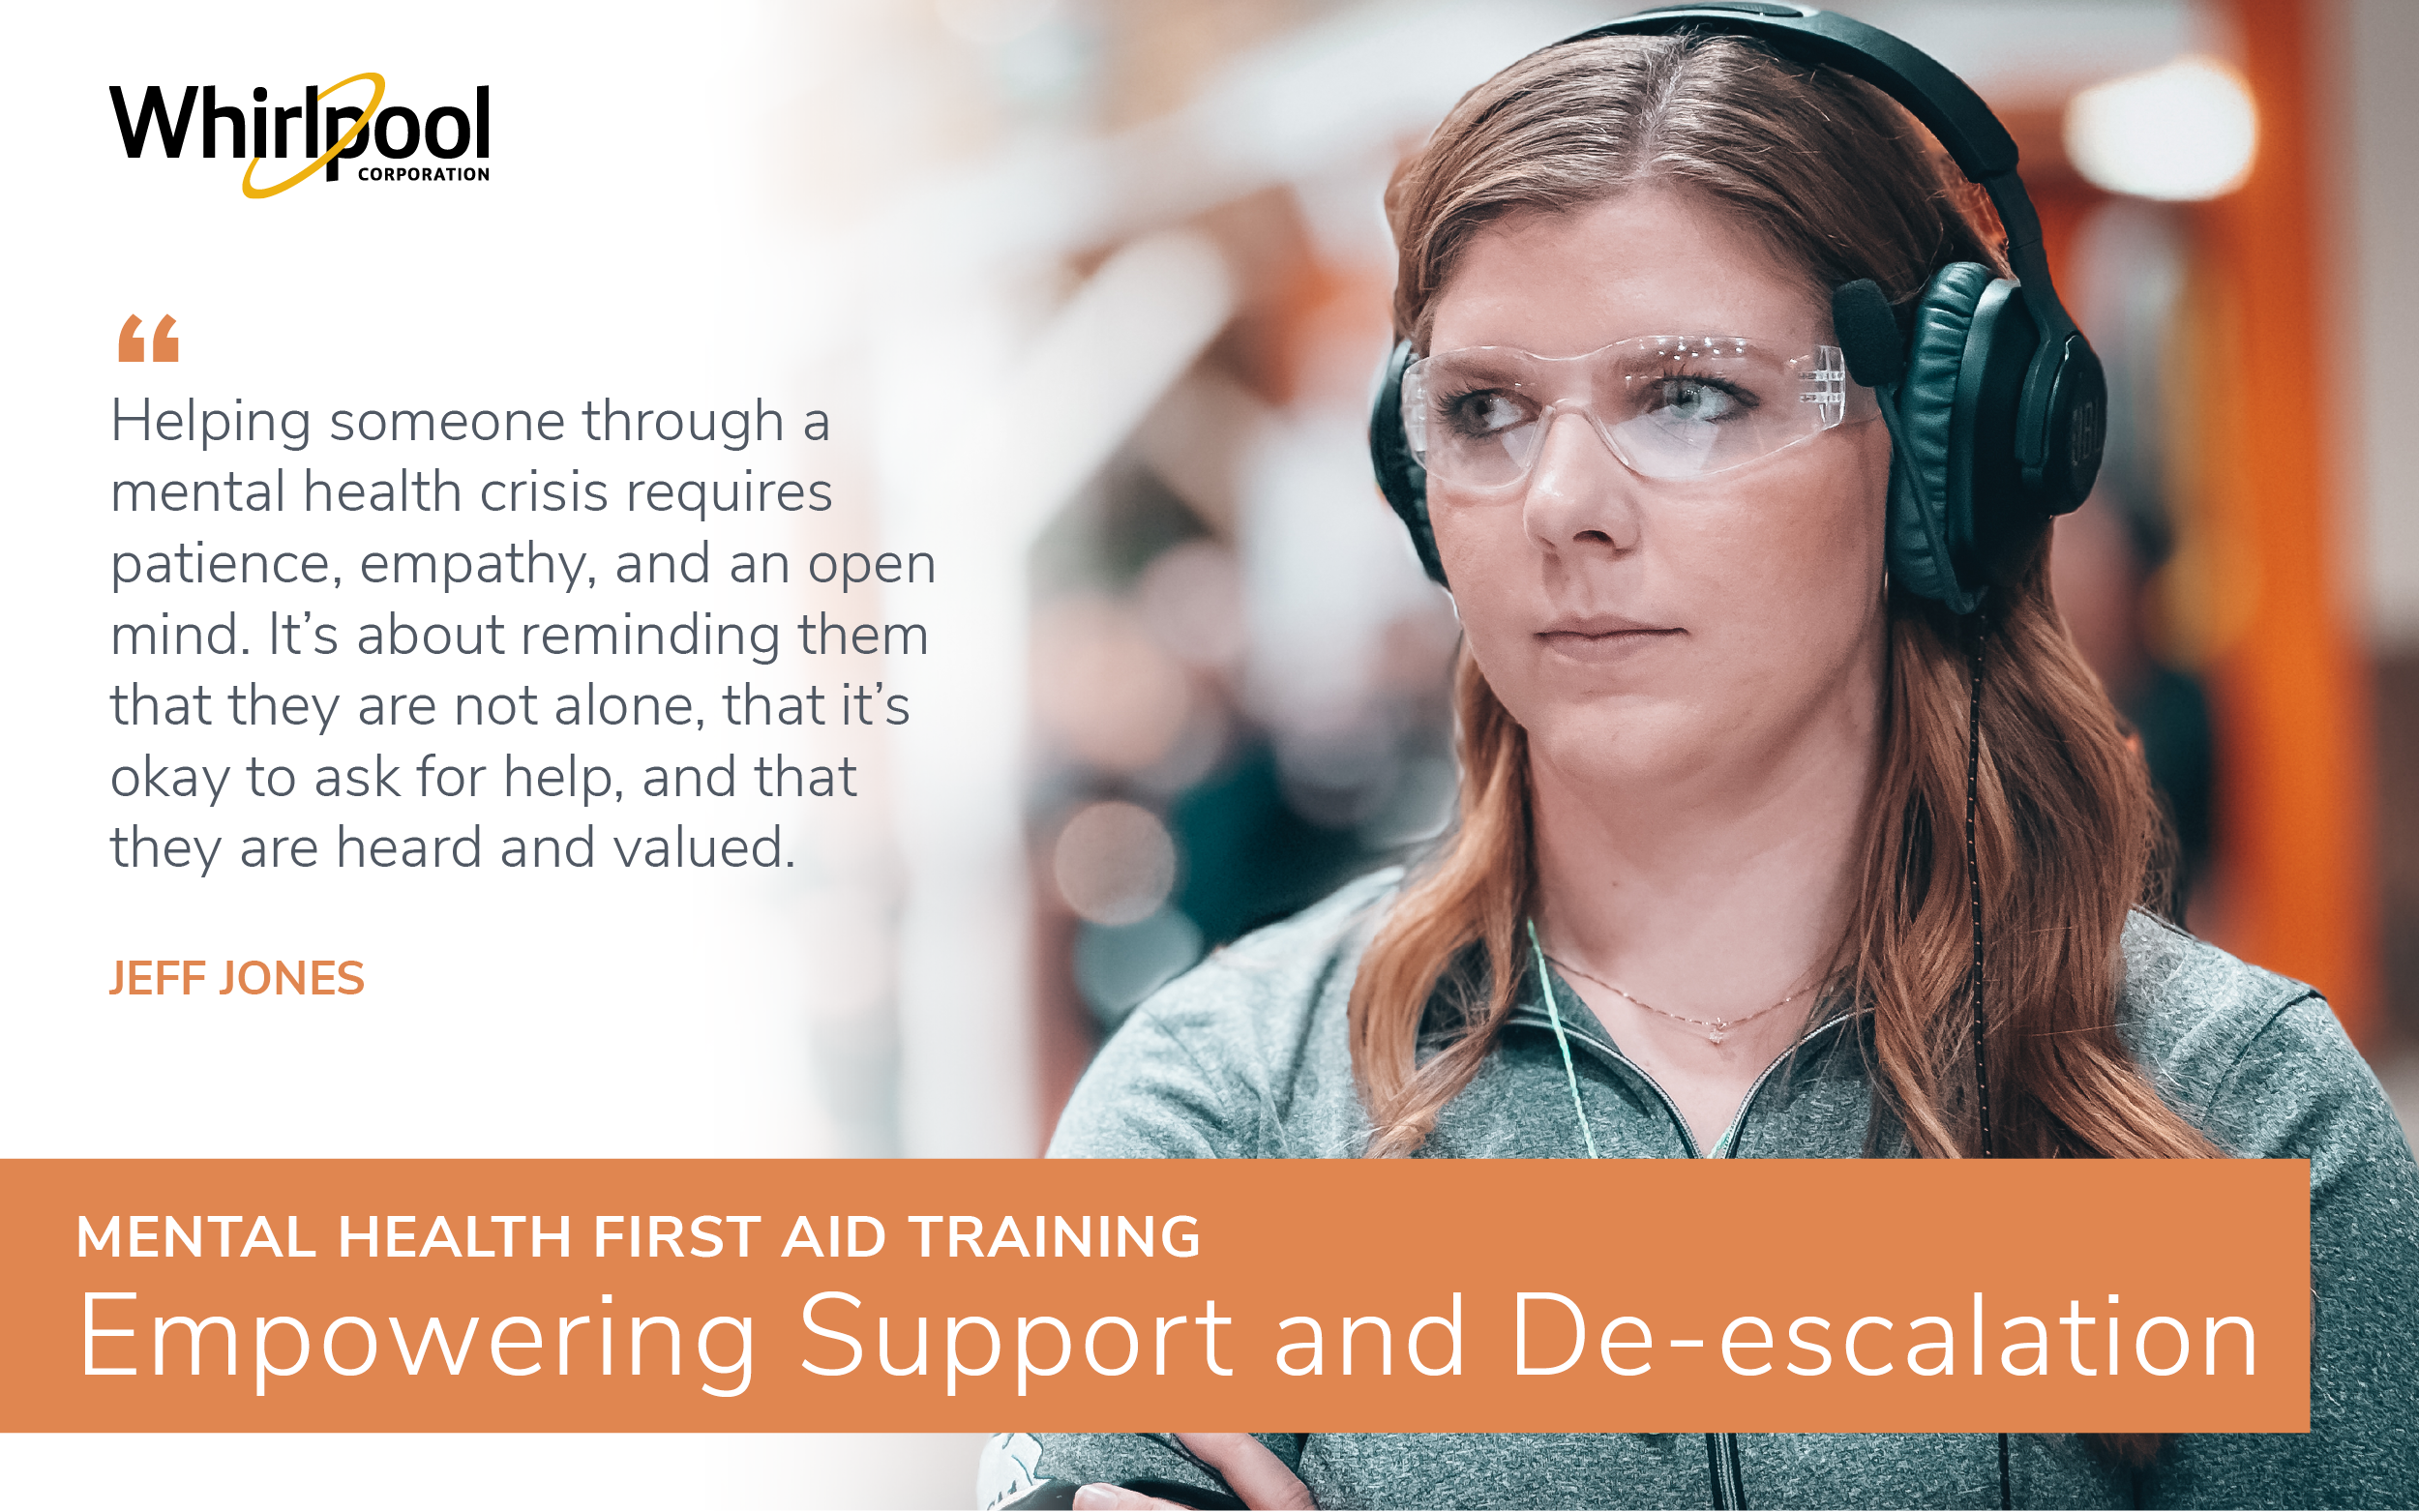 Whirlpool Corporation Empowering Support and De-escalation Through Mental Health First Aid Training 3